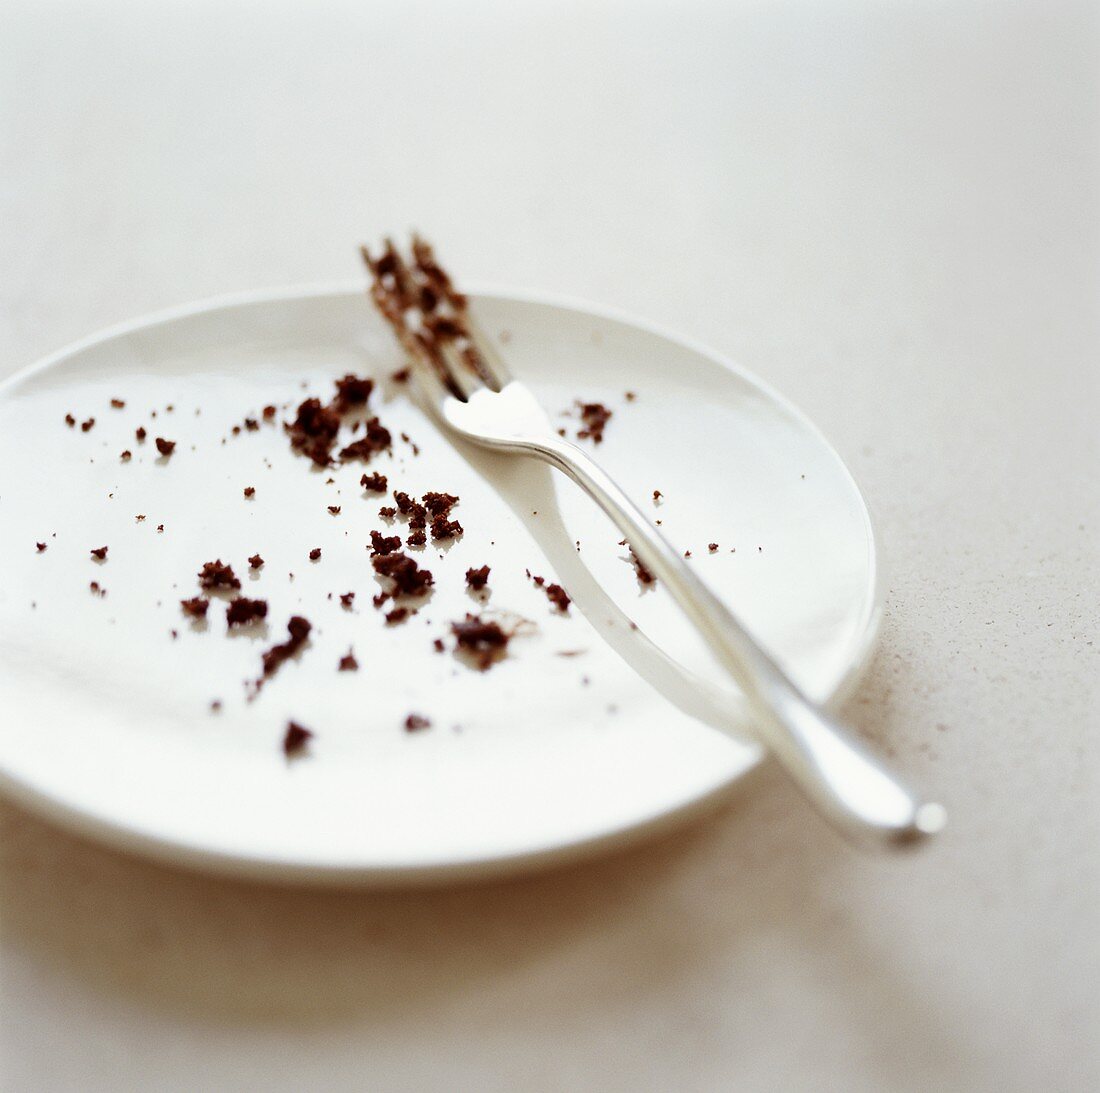 Plate with fork and cake crumbs